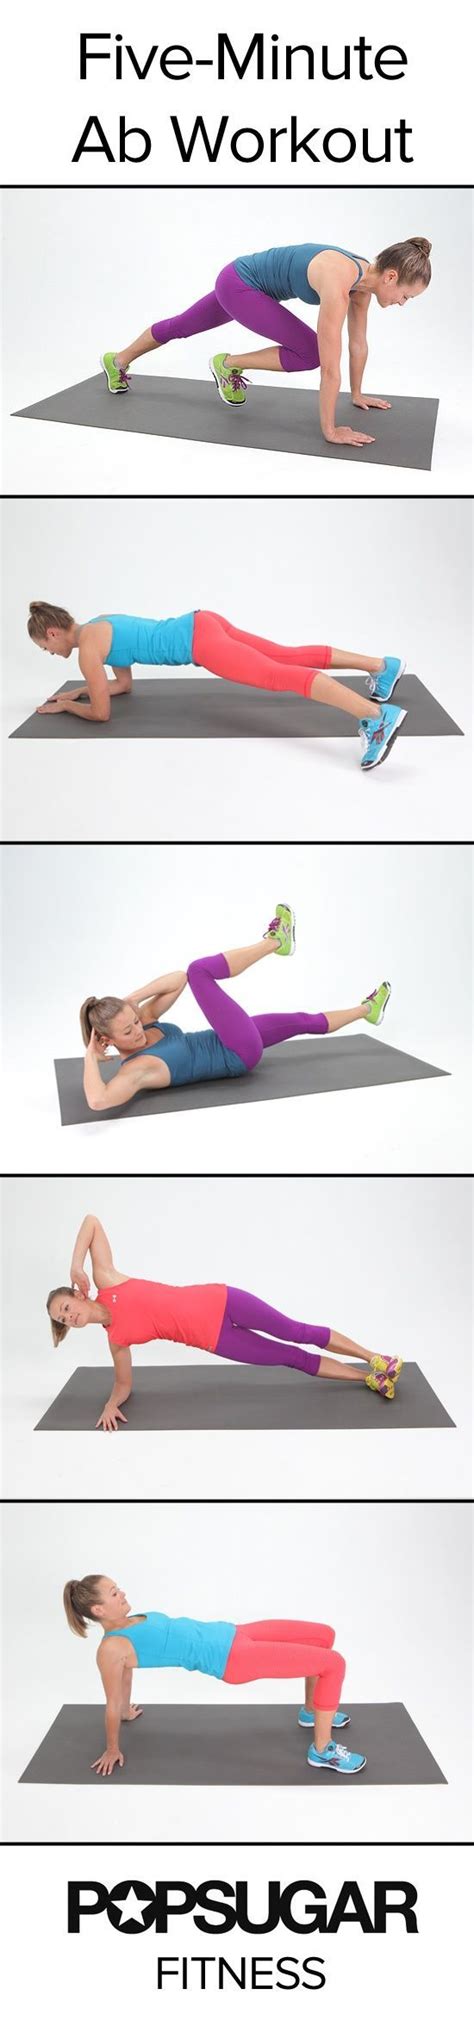 Five Minute Ab Workout This Five Minute Ab Workout Will Help You Get A